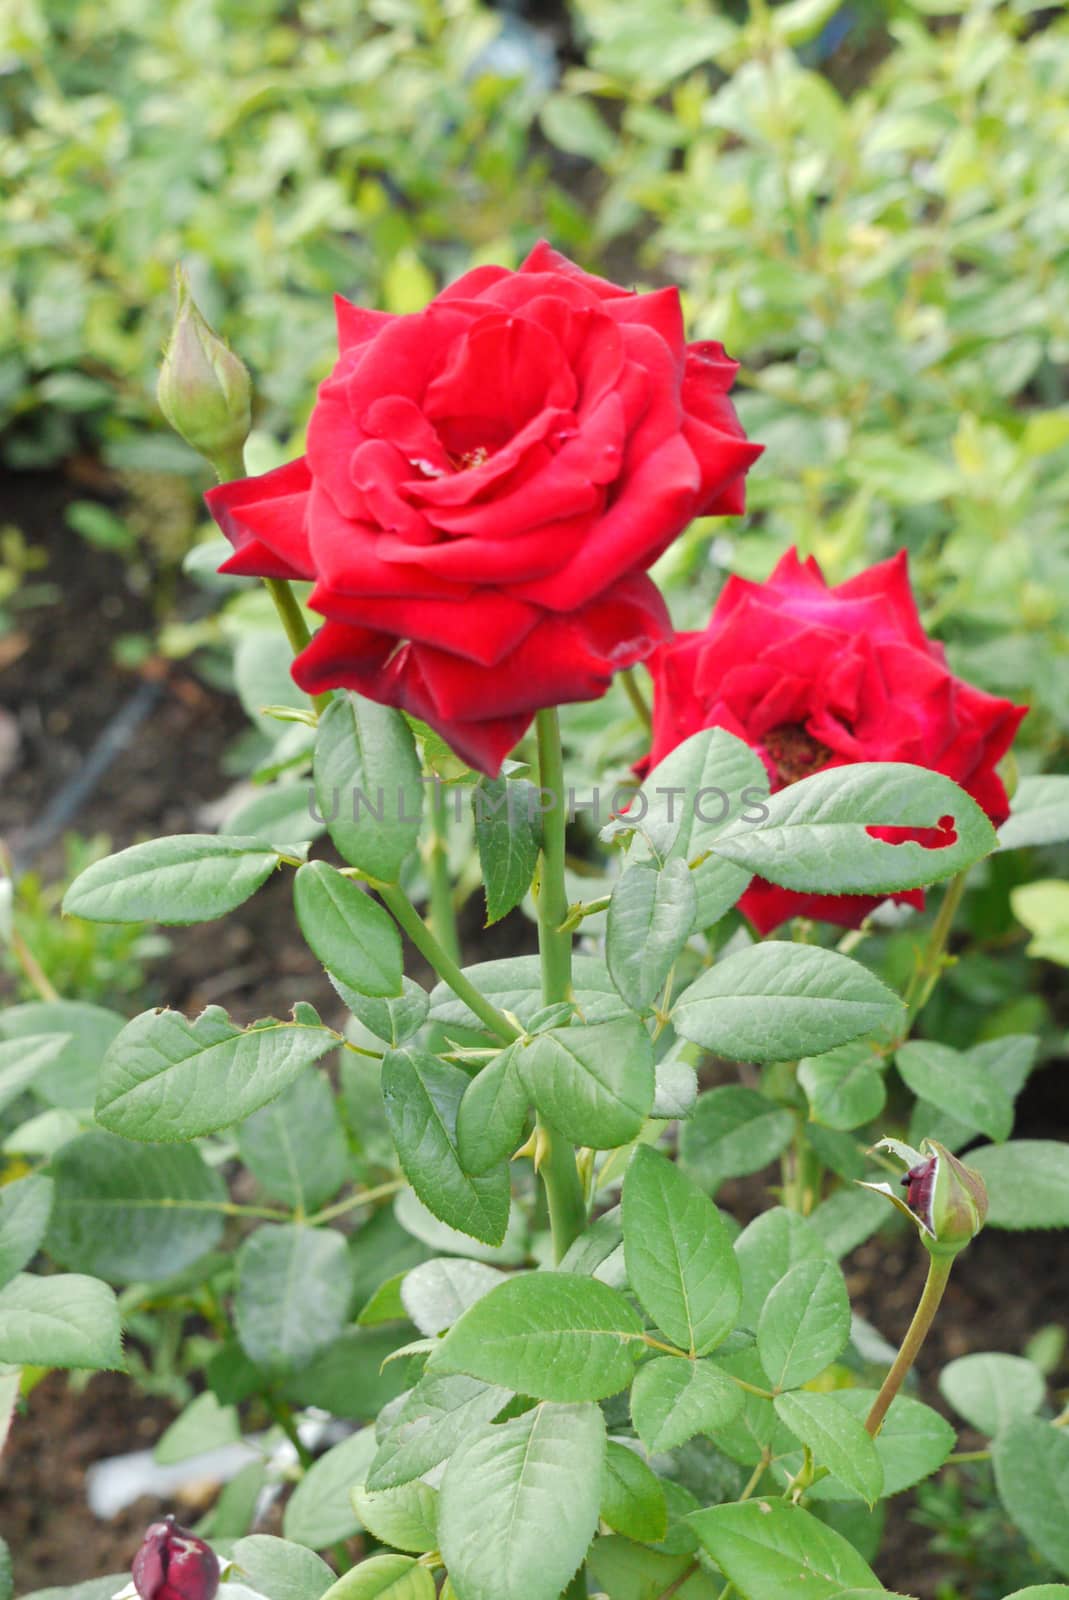 two large opened buds of bright scarlet roses by Adamchuk